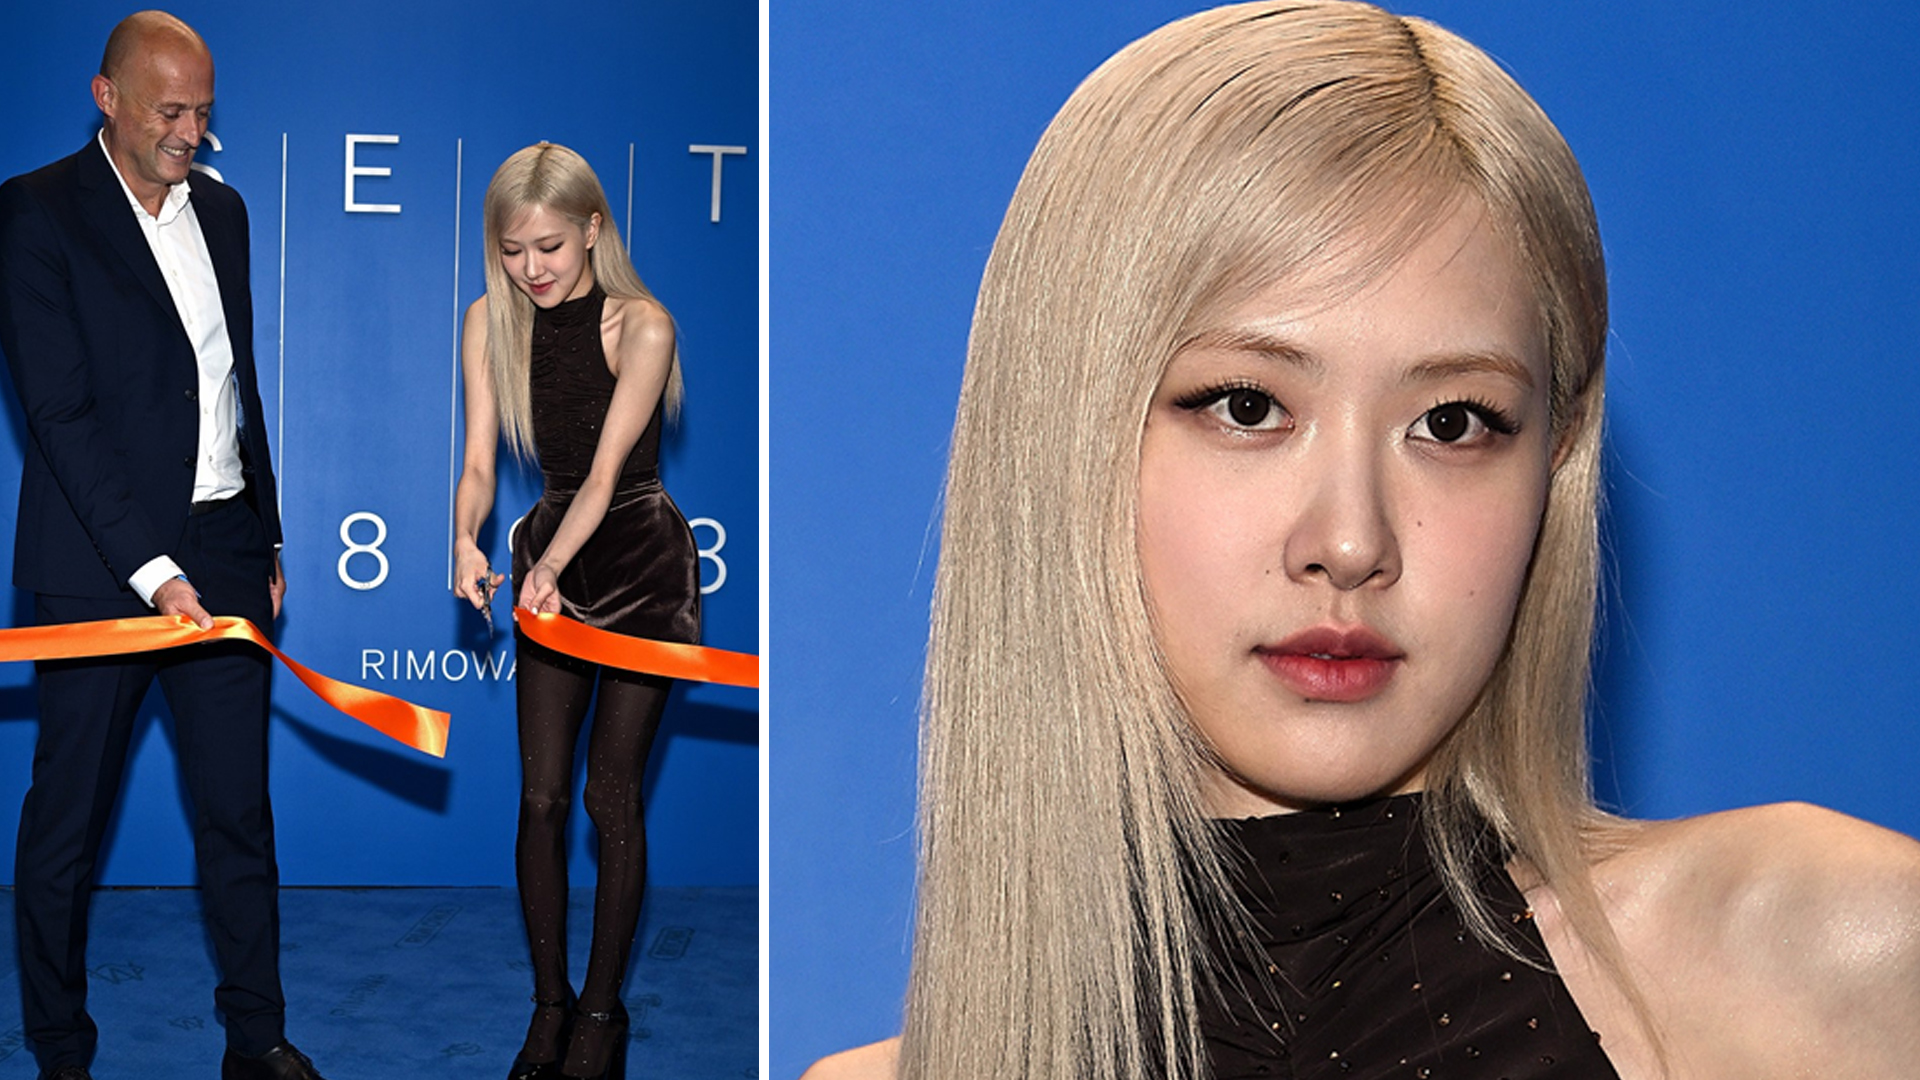 Blackpink’s Rose Cuts The Ribbon for Rimowa’s 125th Anniversary.